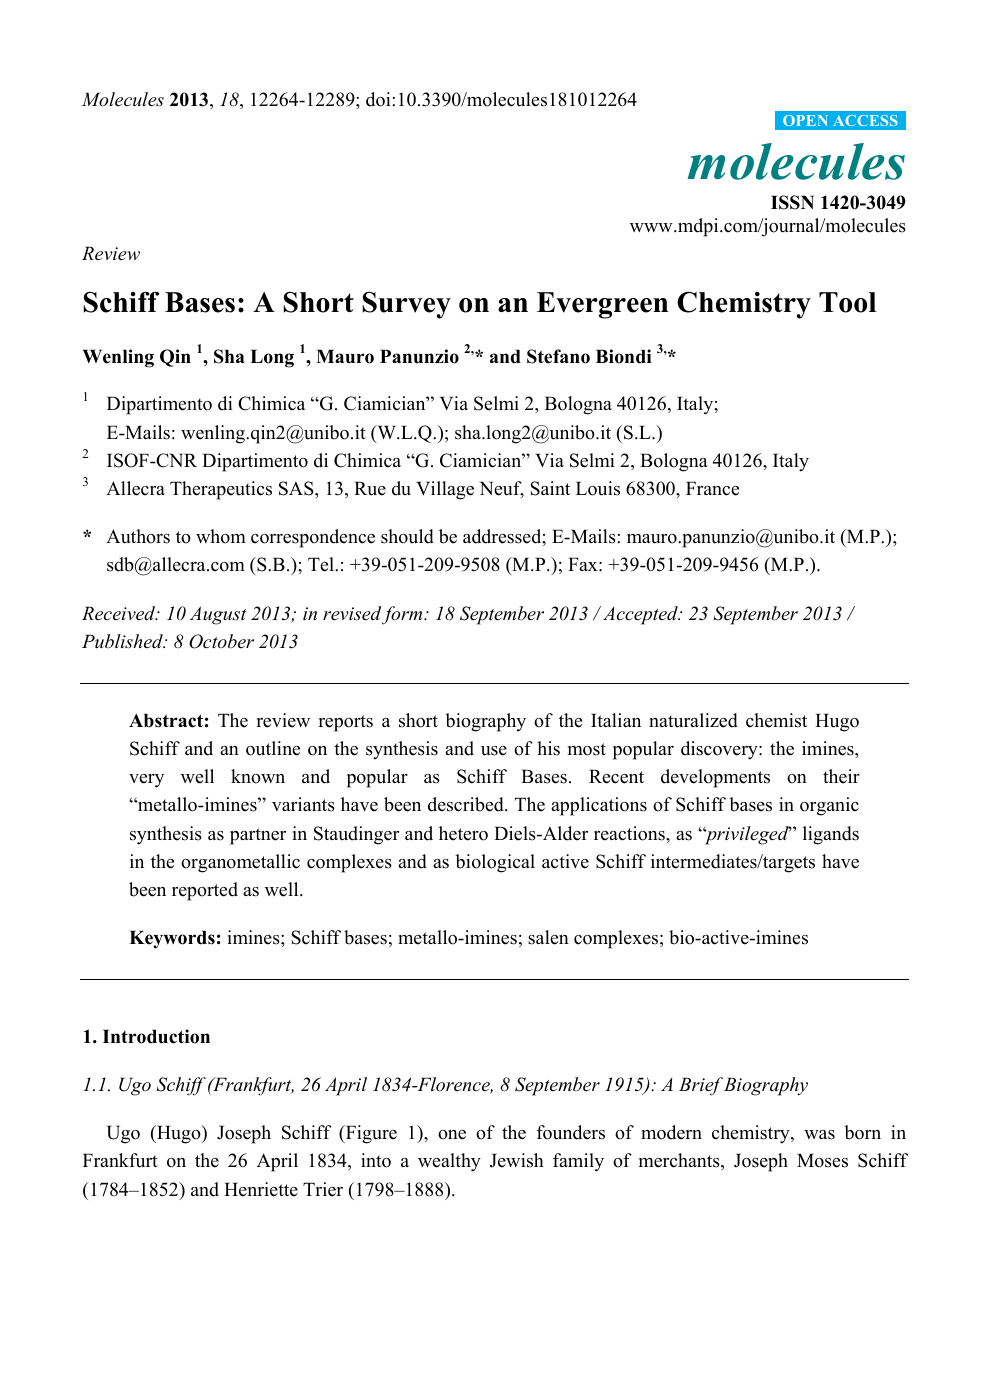 Schiff Bases A Short Survey On An Evergreen Chemistry Tool Topic Of Research Paper In Chemical Sciences Download Scholarly Article Pdf And Read For Free On Cyberleninka Open Science Hub